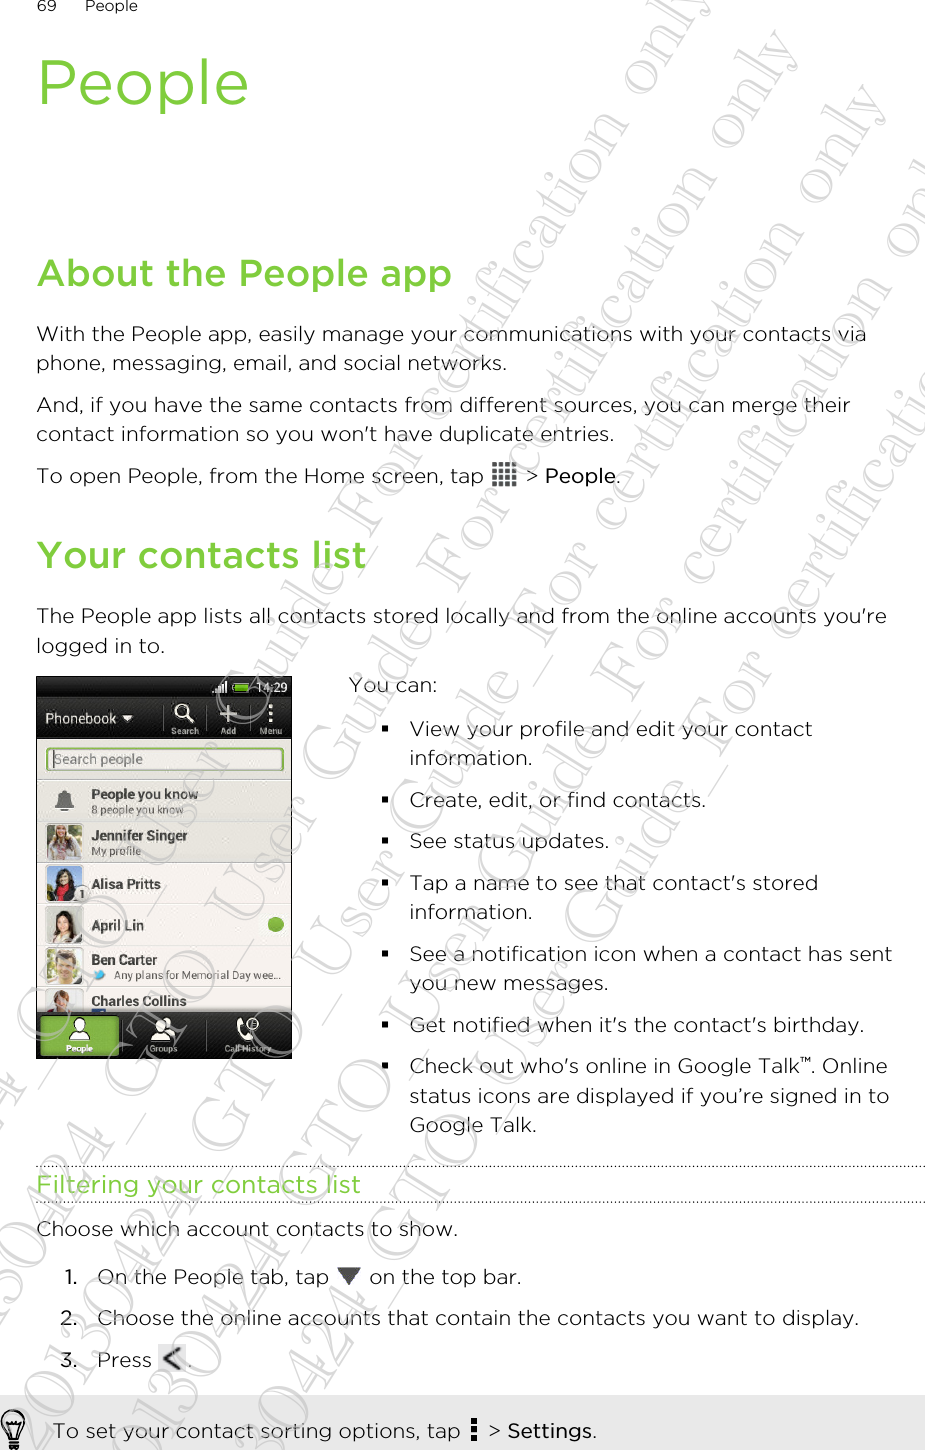 PeopleAbout the People appWith the People app, easily manage your communications with your contacts viaphone, messaging, email, and social networks.And, if you have the same contacts from different sources, you can merge theircontact information so you won&apos;t have duplicate entries.To open People, from the Home screen, tap   &gt; People.Your contacts listThe People app lists all contacts stored locally and from the online accounts you&apos;relogged in to.You can:§View your profile and edit your contactinformation.§Create, edit, or find contacts.§See status updates.§Tap a name to see that contact&apos;s storedinformation.§See a notification icon when a contact has sentyou new messages.§Get notified when it&apos;s the contact&apos;s birthday.§Check out who&apos;s online in Google Talk™. Onlinestatus icons are displayed if you’re signed in toGoogle Talk.Filtering your contacts listChoose which account contacts to show.1. On the People tab, tap   on the top bar.2. Choose the online accounts that contain the contacts you want to display.3. Press  .To set your contact sorting options, tap   &gt; Settings.69 People20130424_GTO_User Guide_For certification only 20130424_GTO_User Guide_For certification only 20130424_GTO_User Guide_For certification only 20130424_GTO_User Guide_For certification only 20130424_GTO_User Guide_For certification only